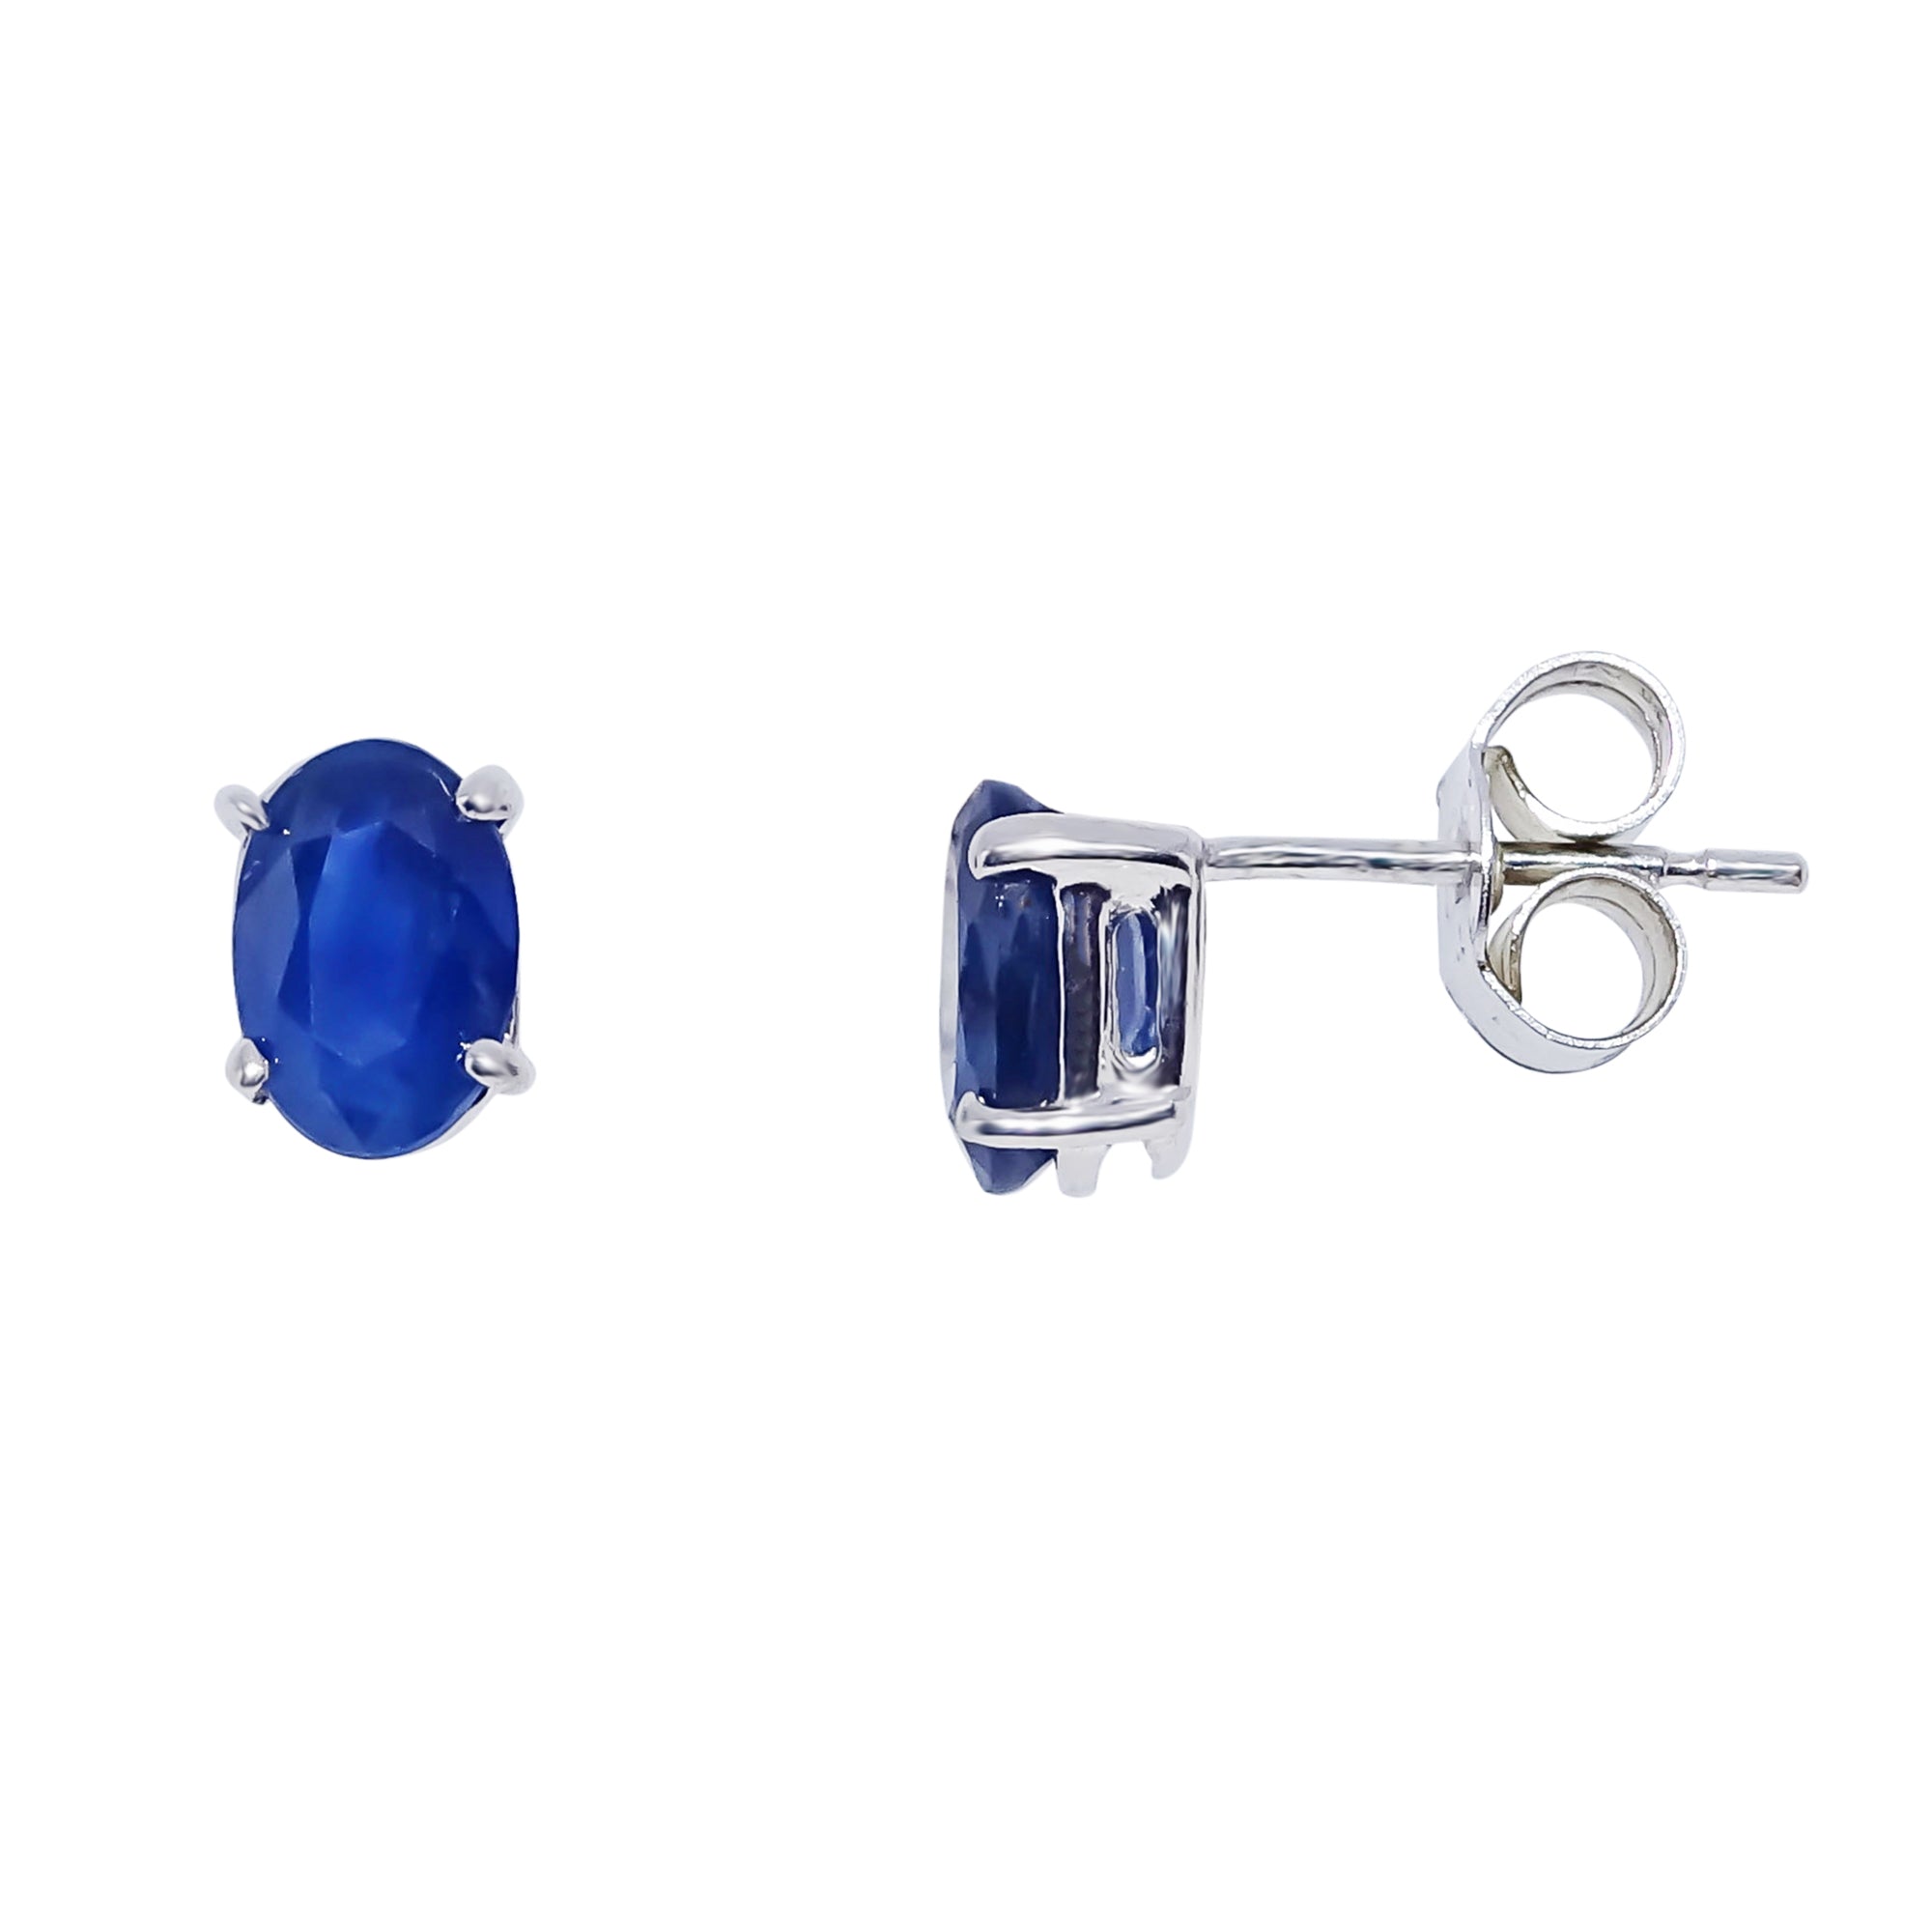 9ct white gold 6x4mm oval sapphire stud earrings